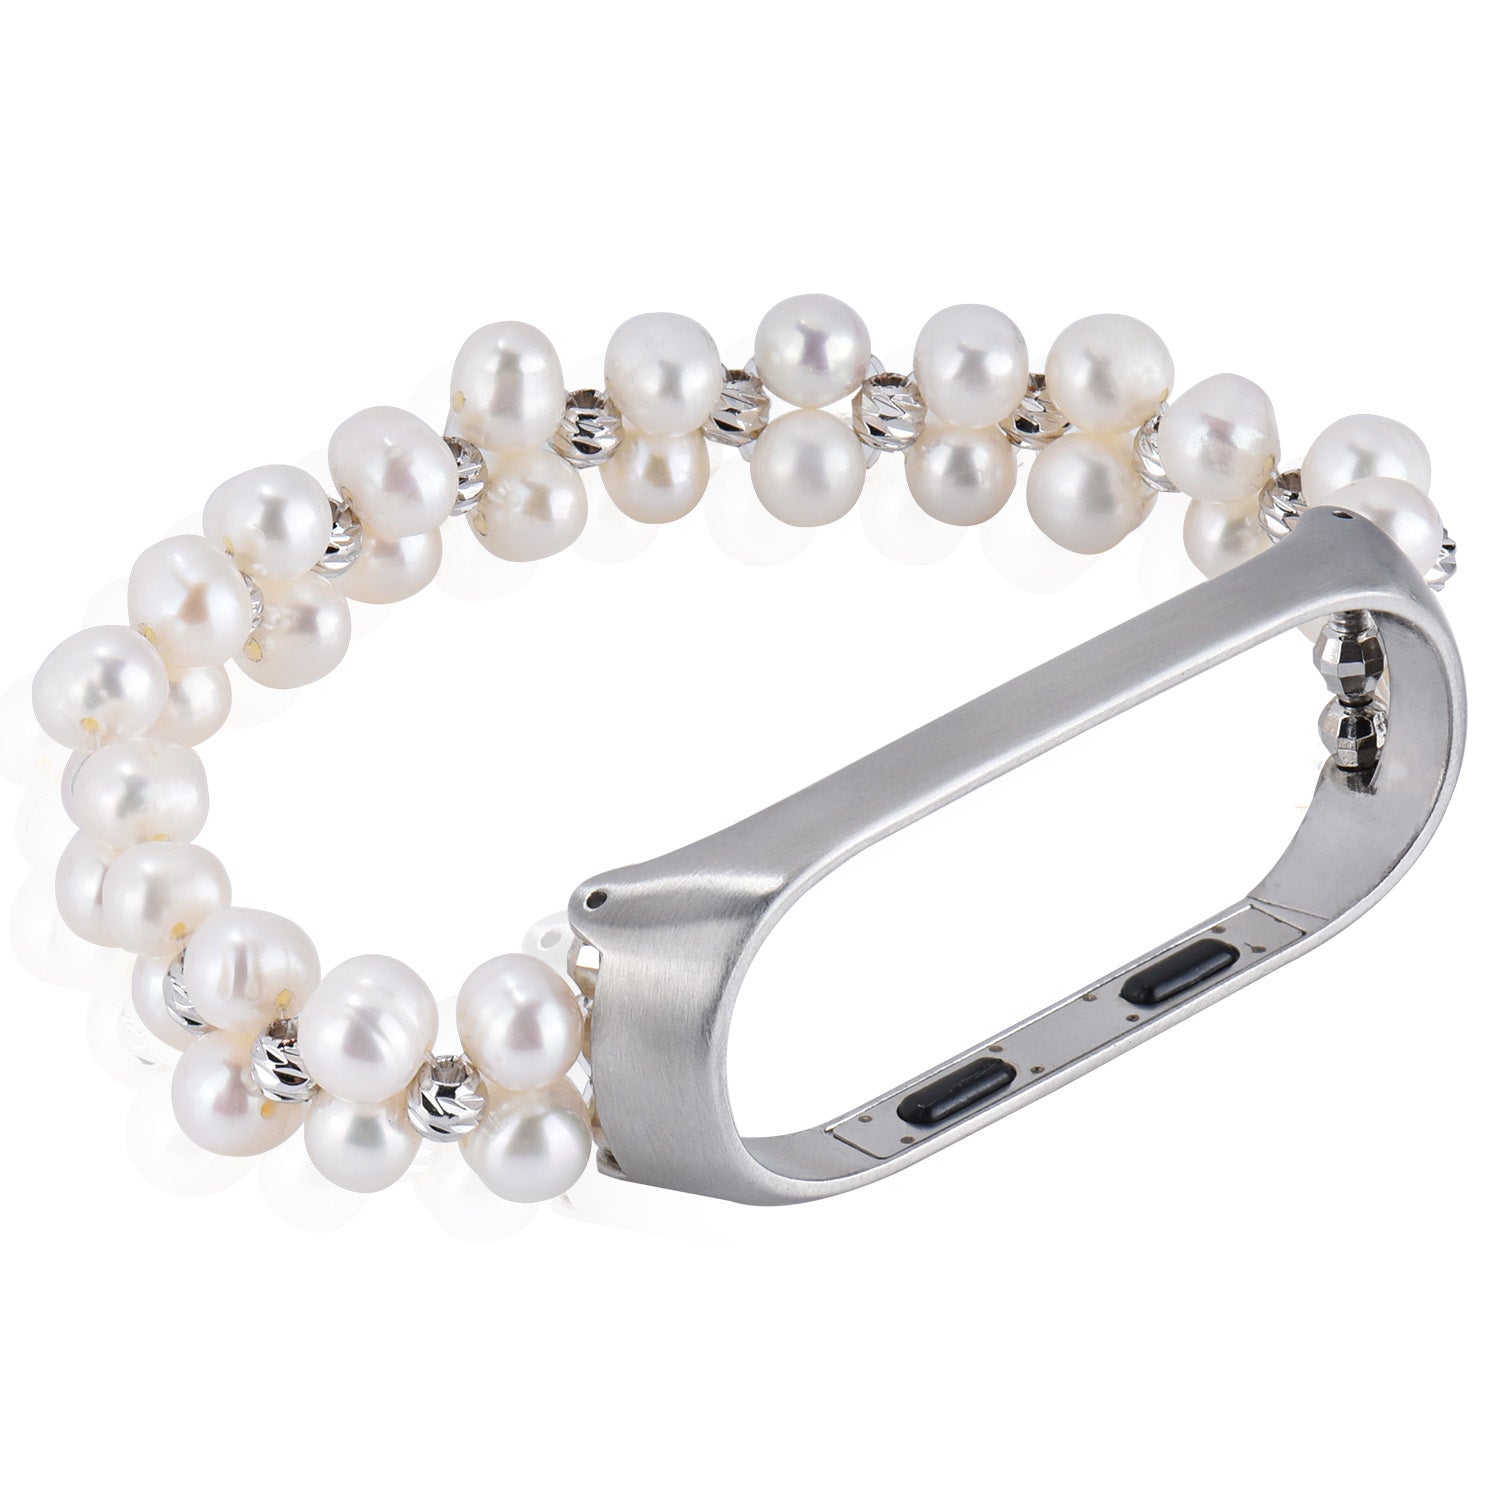 For Xiaomi Mi Band 3/4 Replacement Pearls Bracelet Watch Strap Wrist Band - White